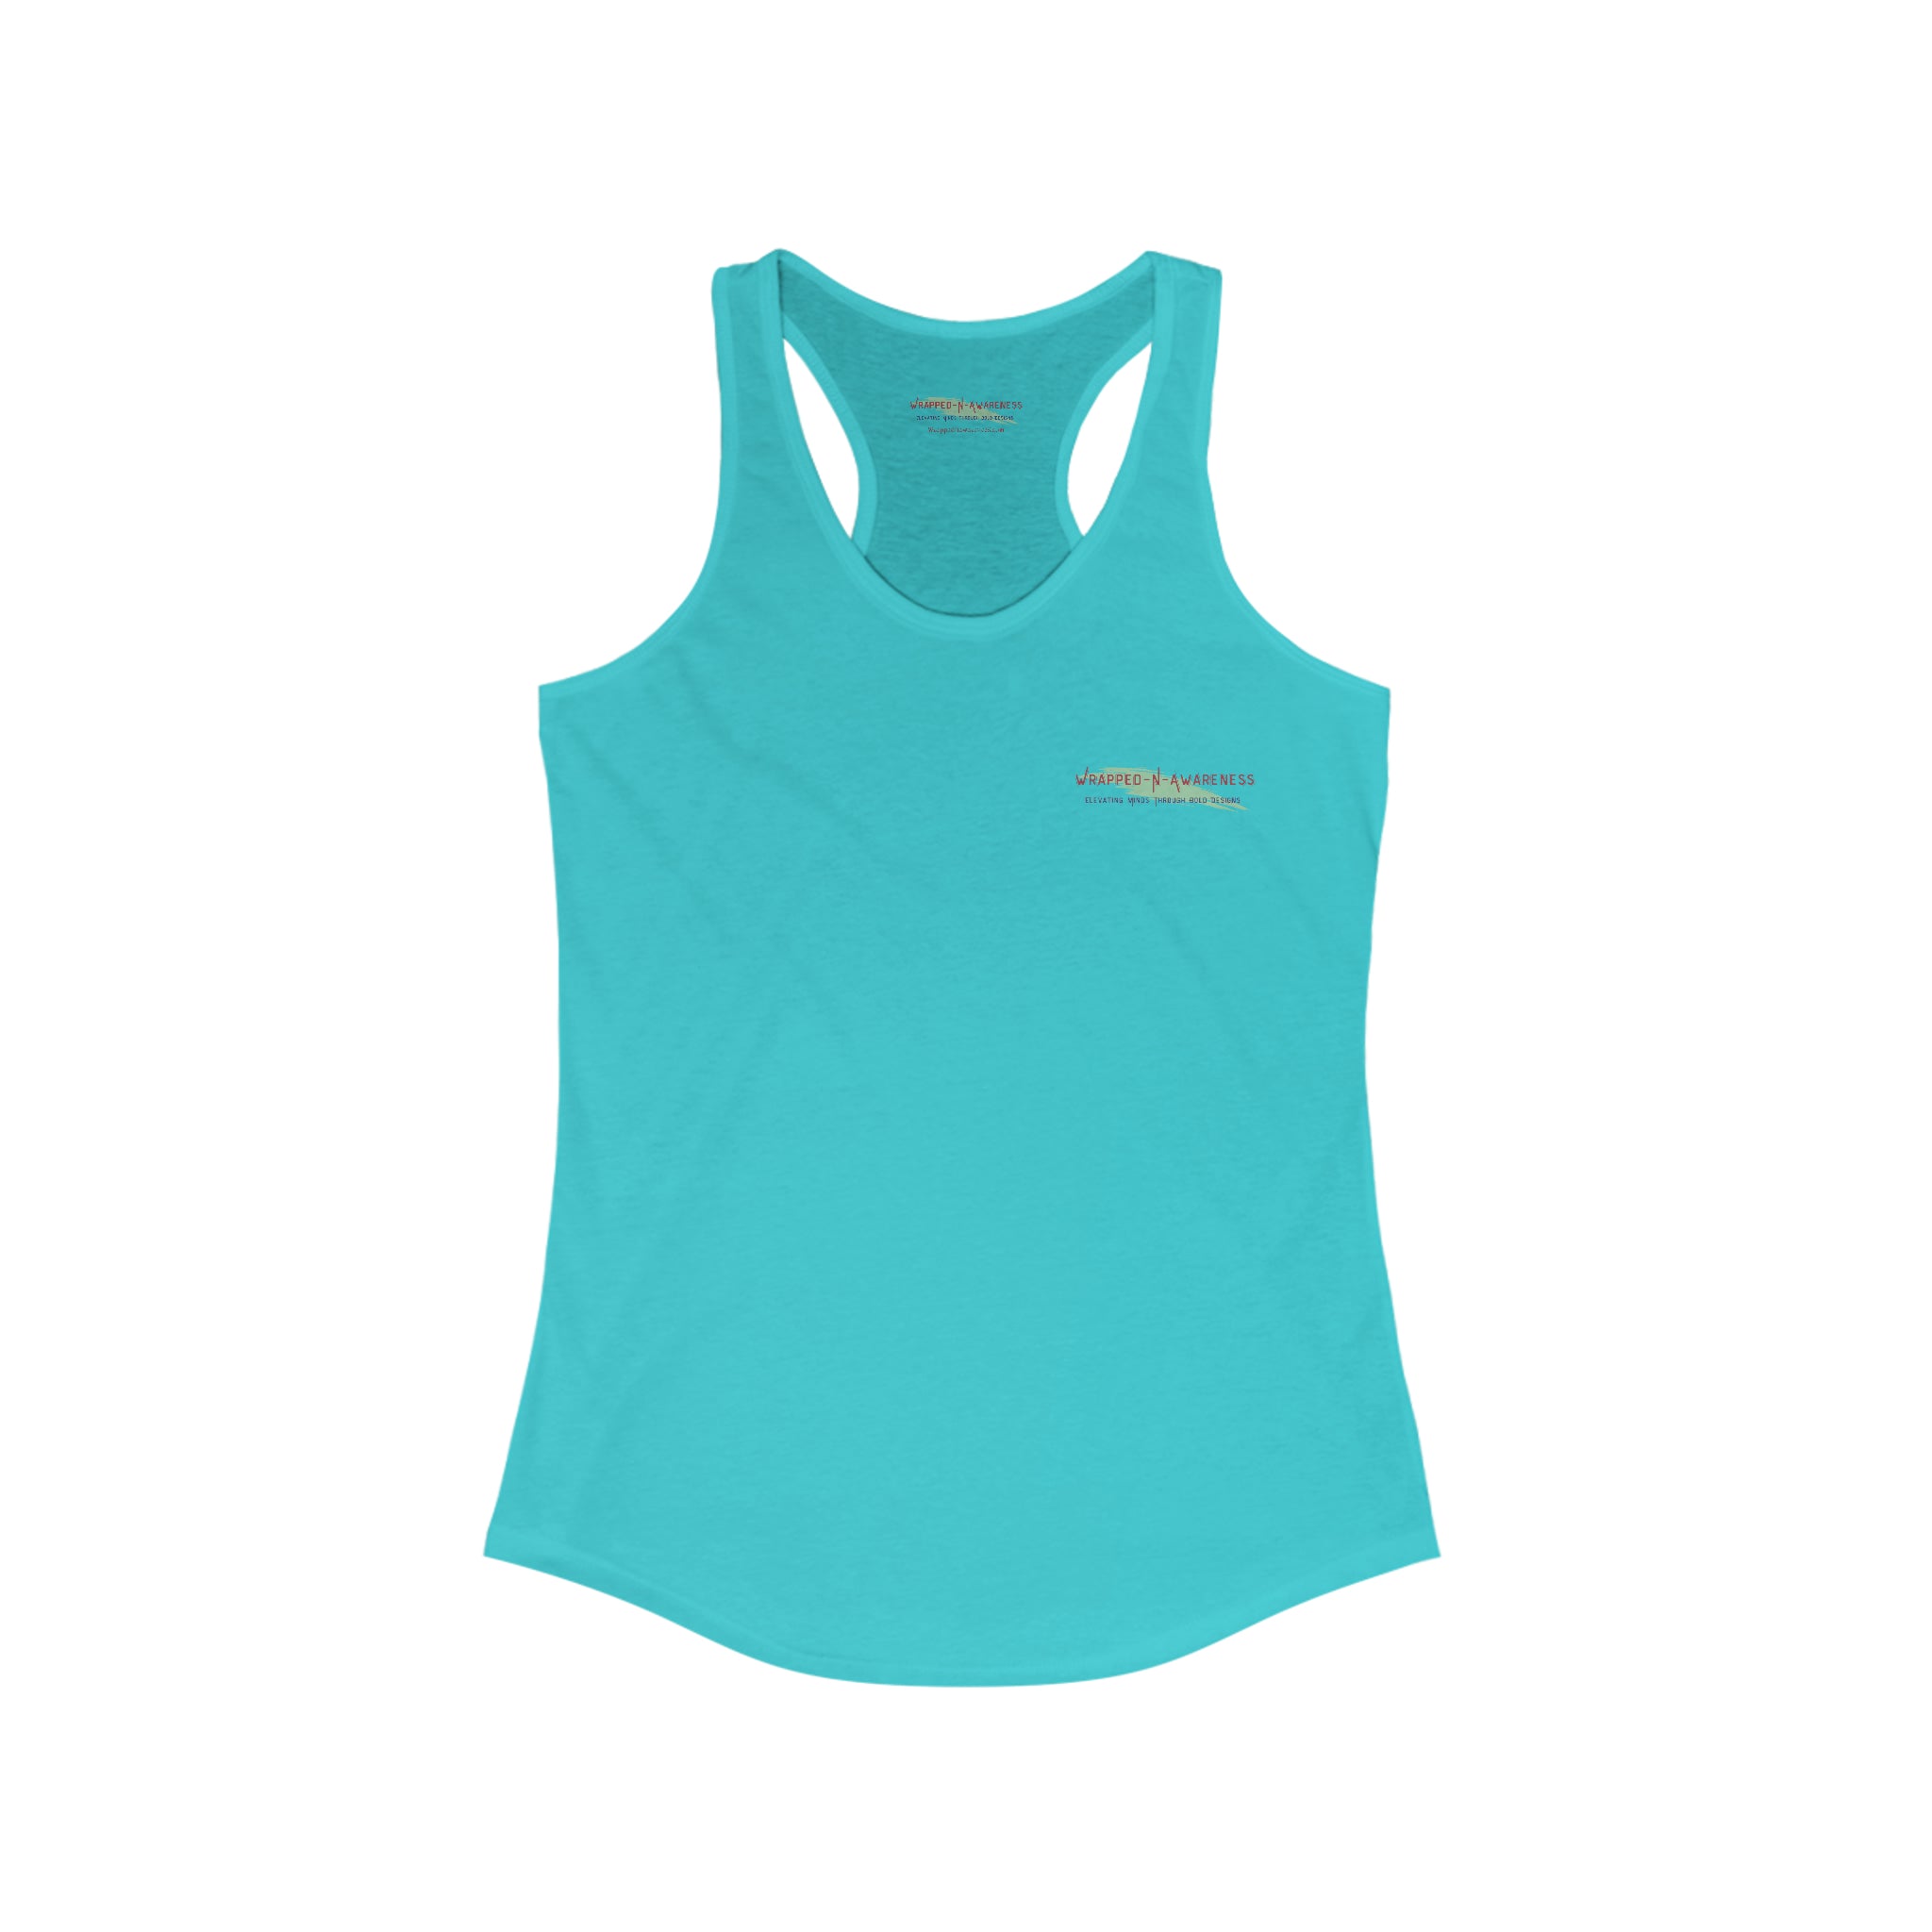 Compassion Racerback Tank: Fashion meets advocacy Solid Warm Gray Activewear Athletic Tank Gym Clothes Performance Tank Racerback Sleeveless Top Sporty Apparel Tank Top Women's Tank Workout Gear Yoga Tank Tank Top 3093199610858379978_2048_c41e7755-90ab-47c2-974e-575779f8ce00 Printify